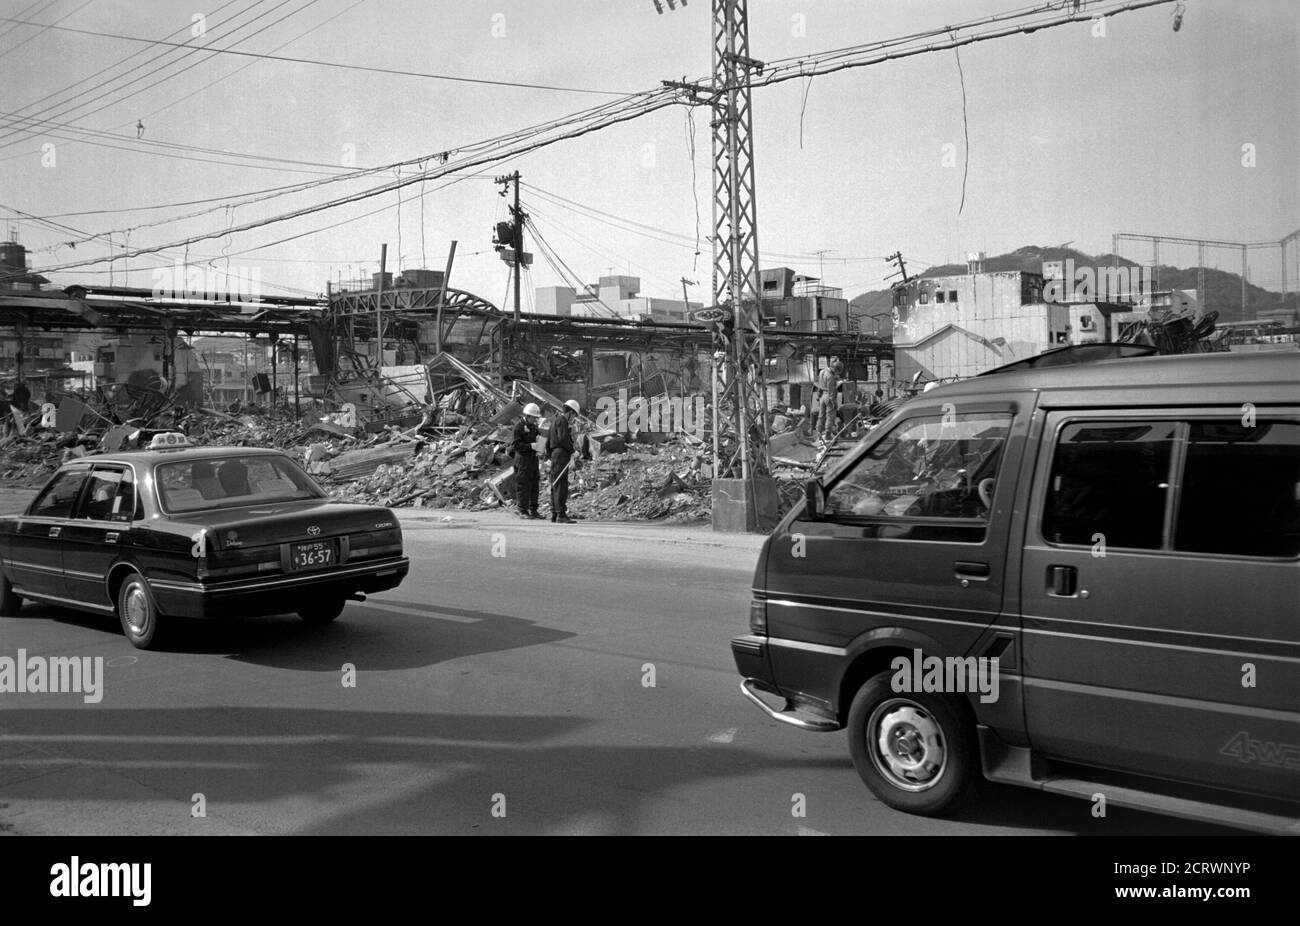 Taxi and van drives past ruins in the aftermath of the 1995 Great Hanshin Earthquake in Kobe, Japan Stock Photo